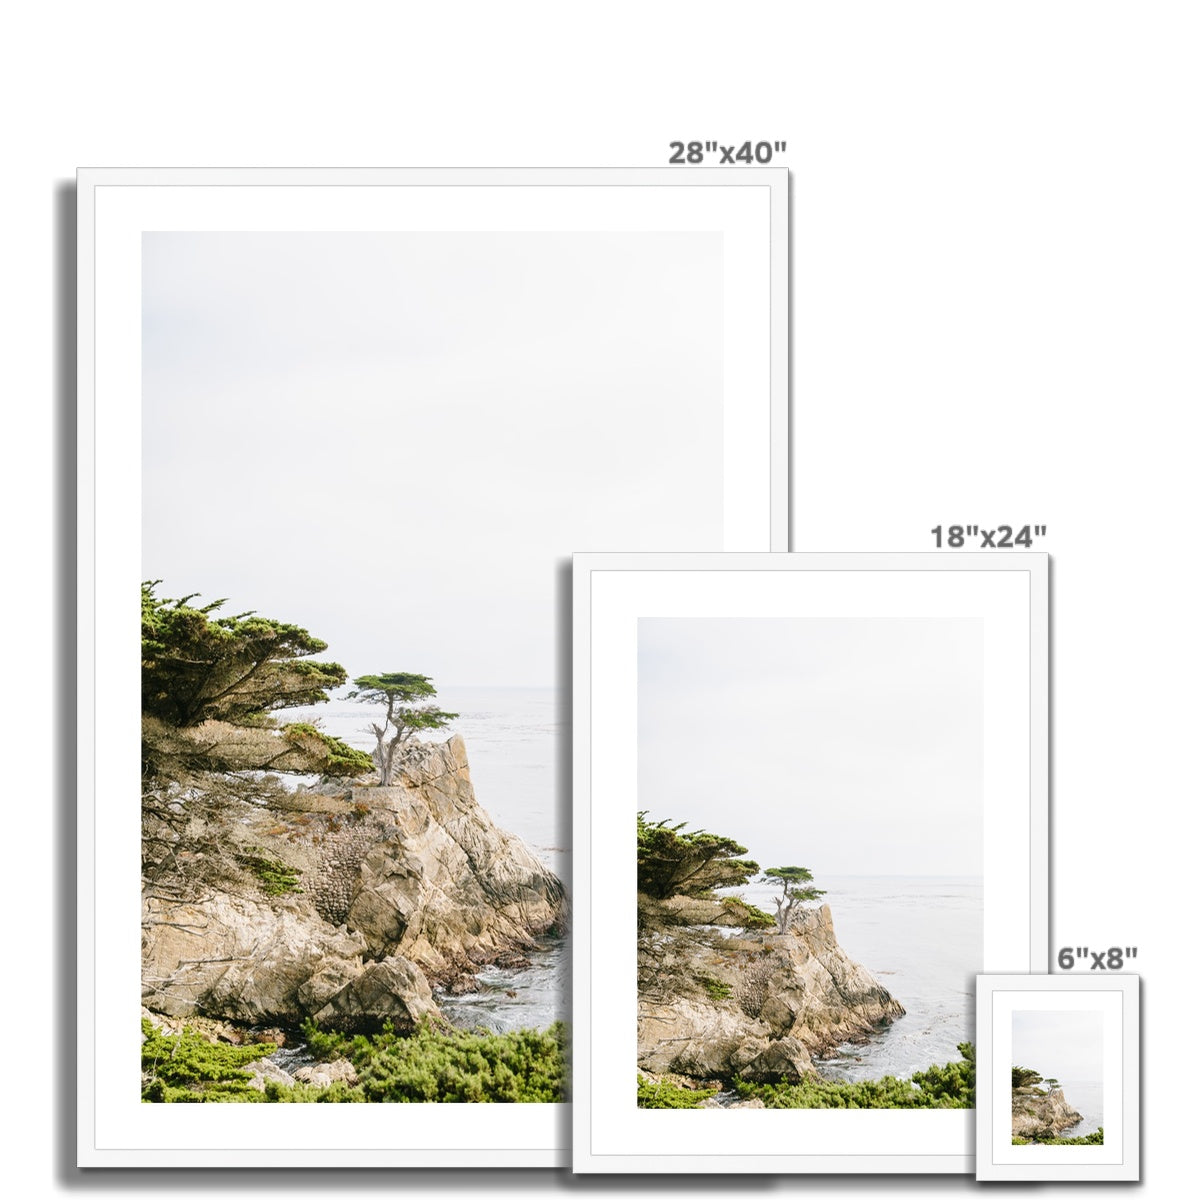 LONE CYPRESS TREE Framed & Mounted Print